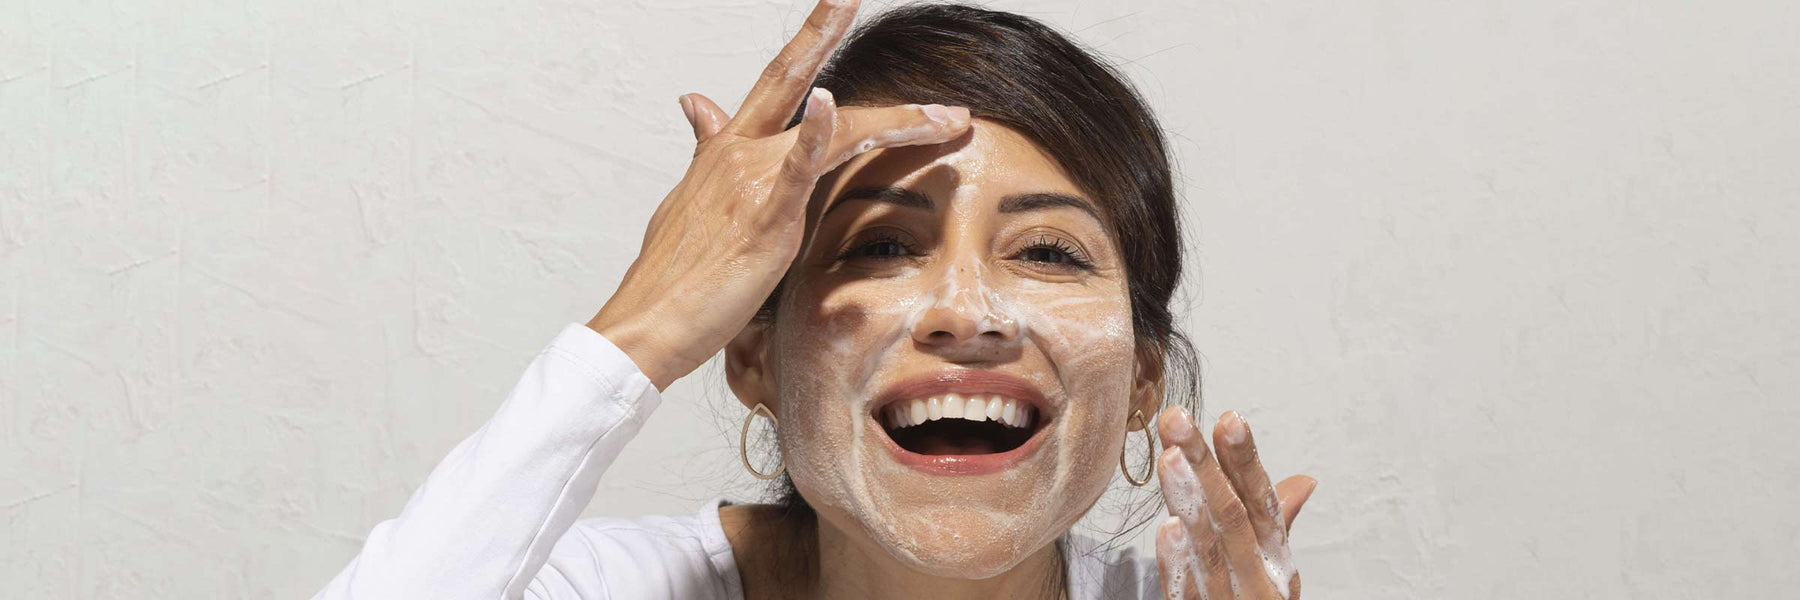 6 Best Gentle Facial Cleansers